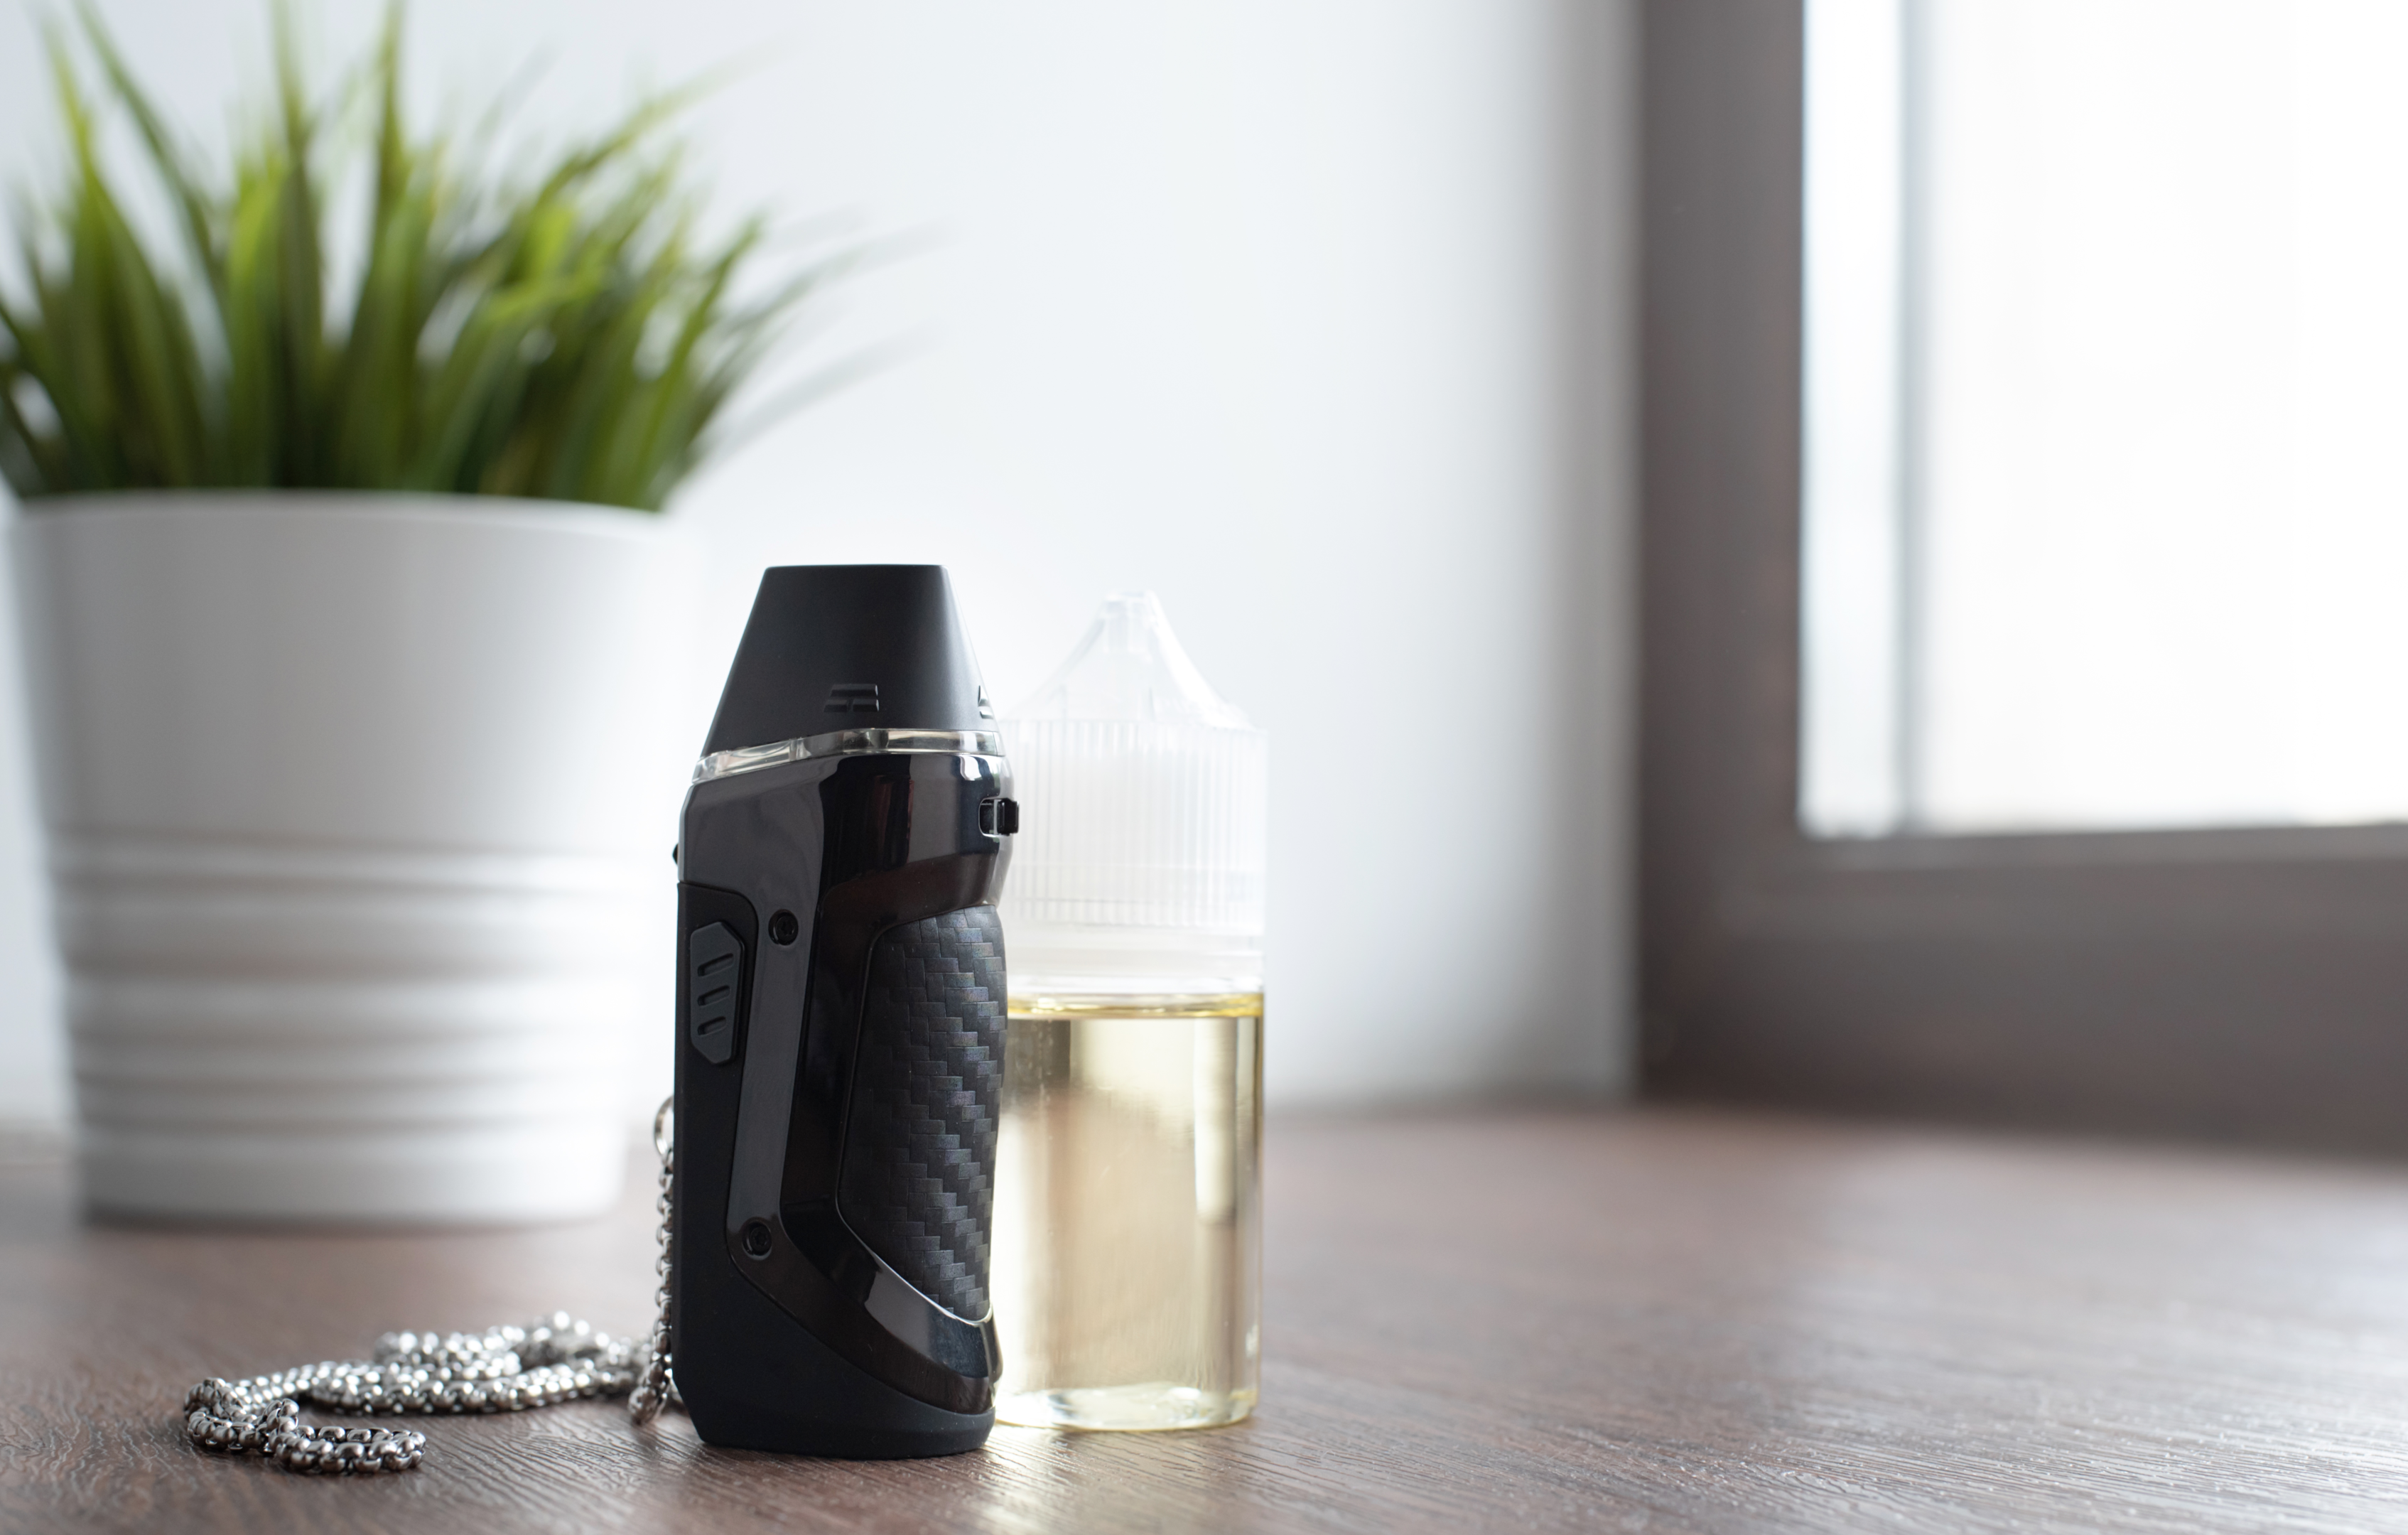 The efficacy of an electronic cigarette depends upon the e-liquid.